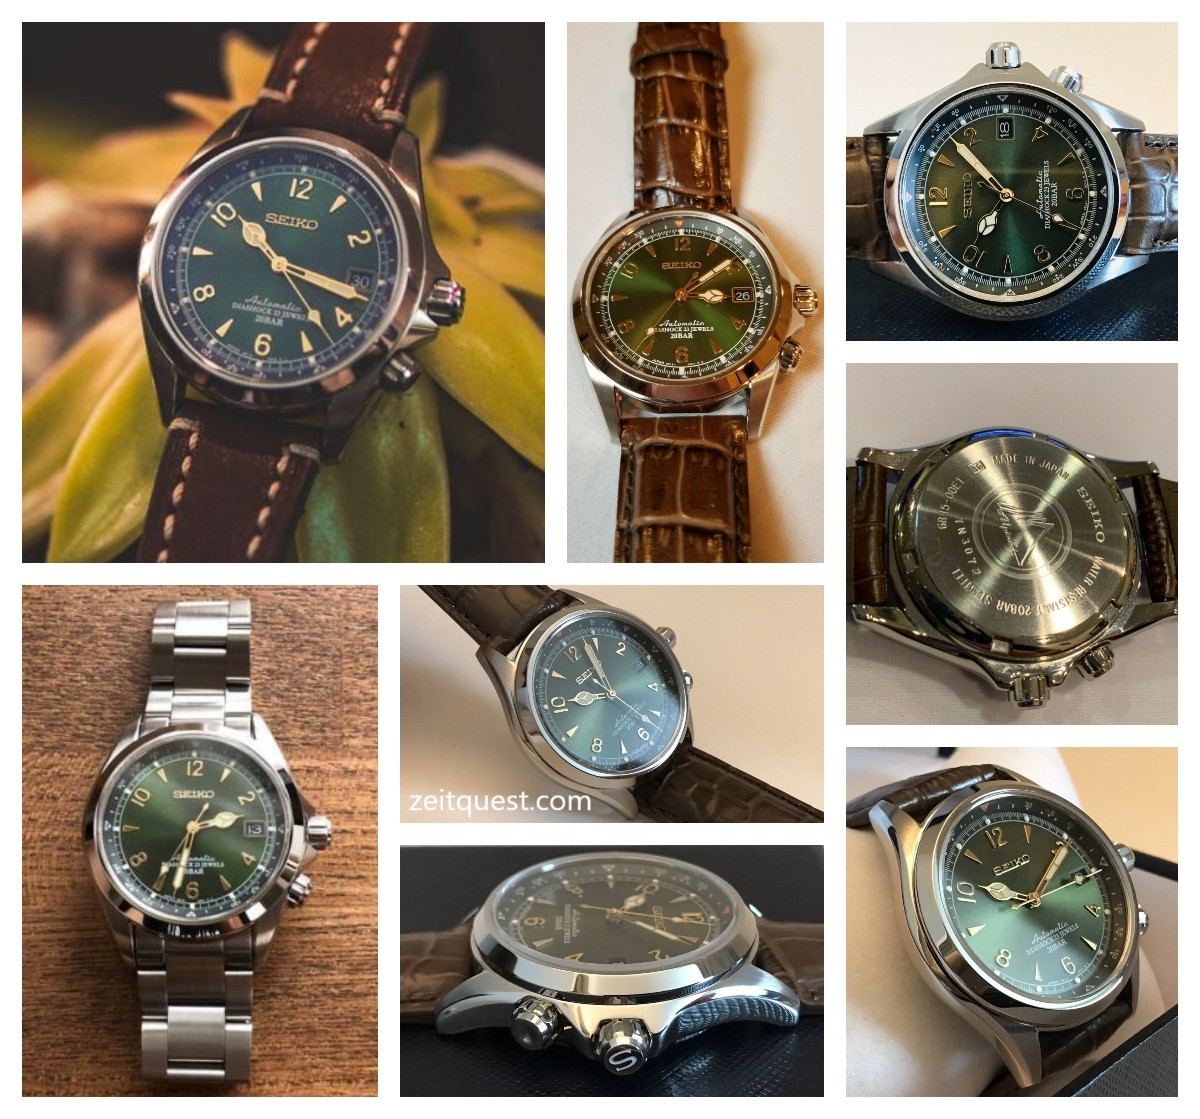 The Seiko SARB017, and its beautiful green dial, on different straps/bracelet. eBay listings.